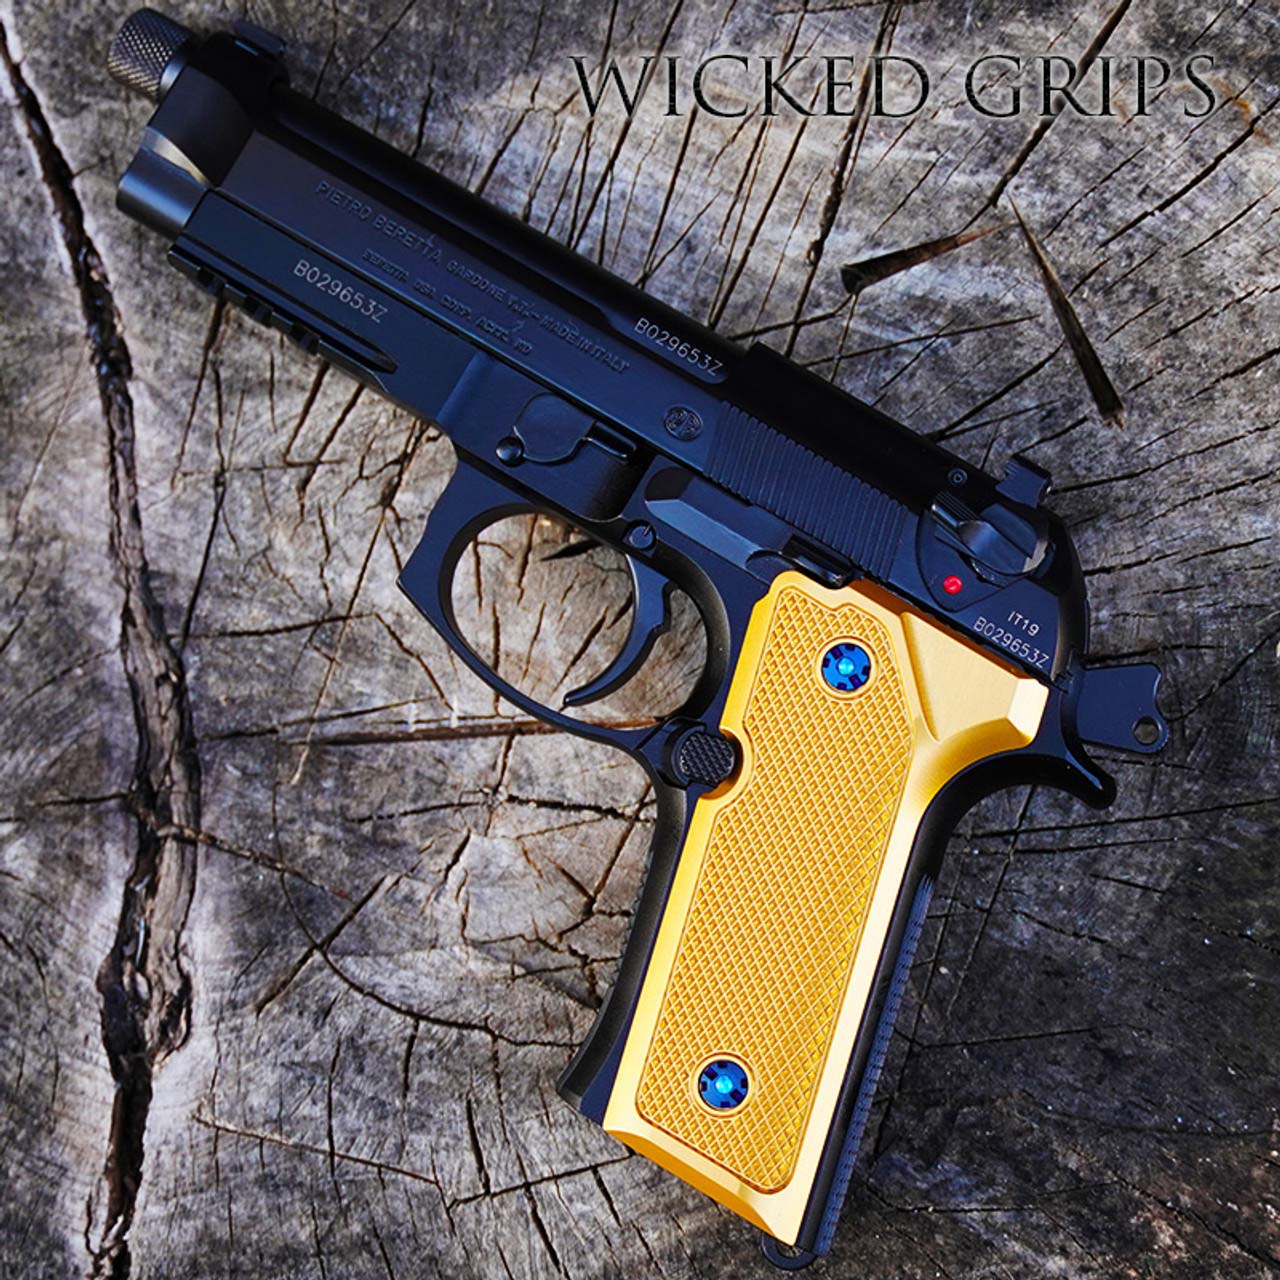 A Beretta 92 with checker patterned grips